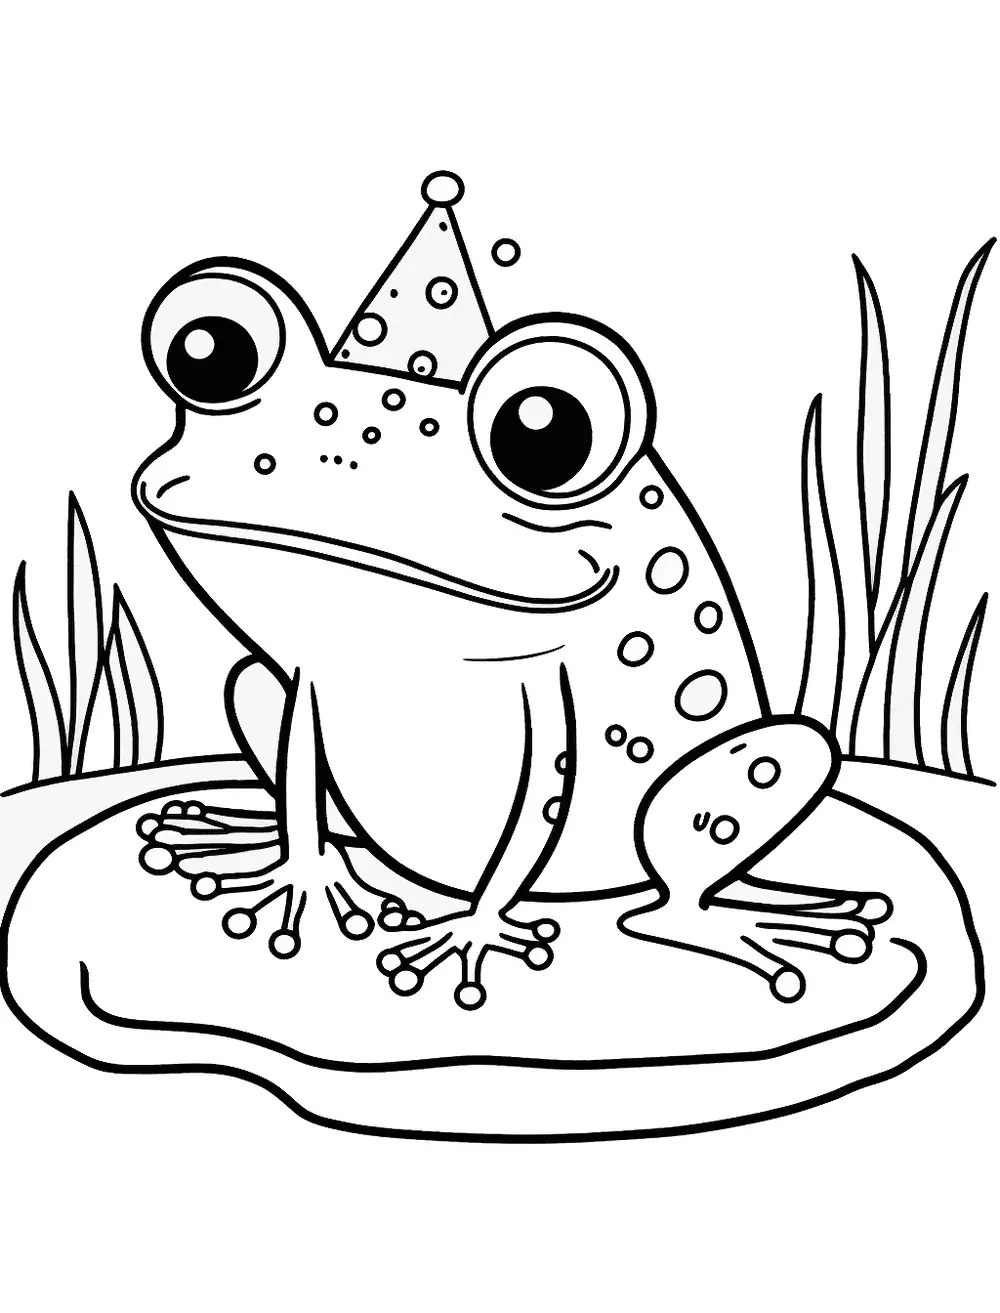 Frog coloring pages by coloringpageswk on